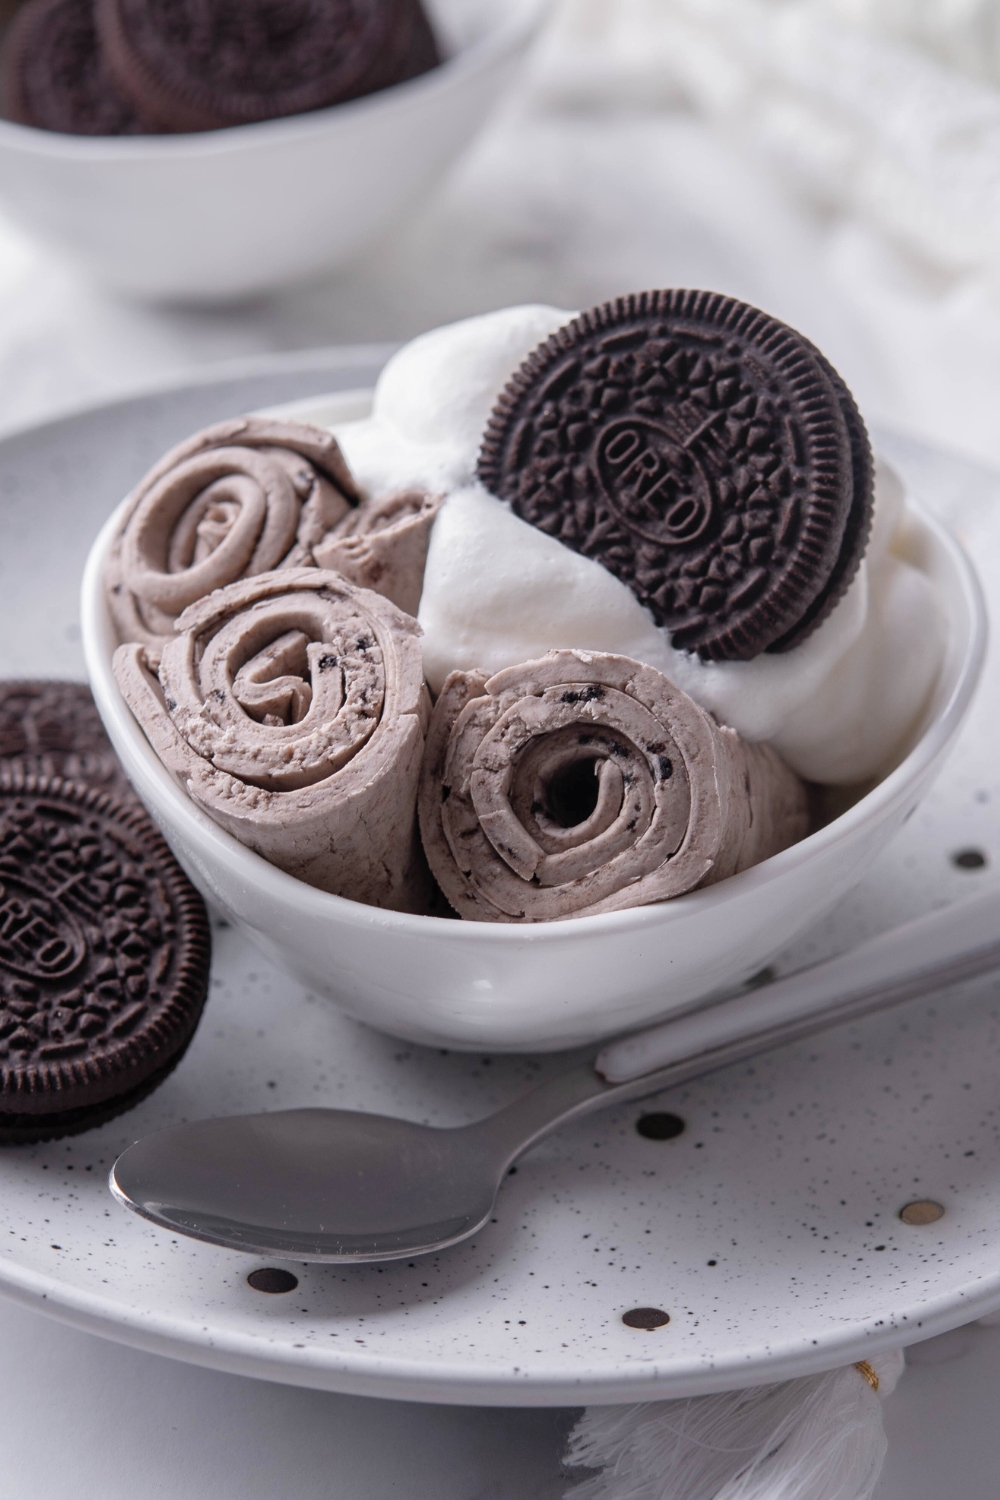 Three ice cream rolls against one another in a bowl with whipped cream and an Oreo on the side of the one bowl.